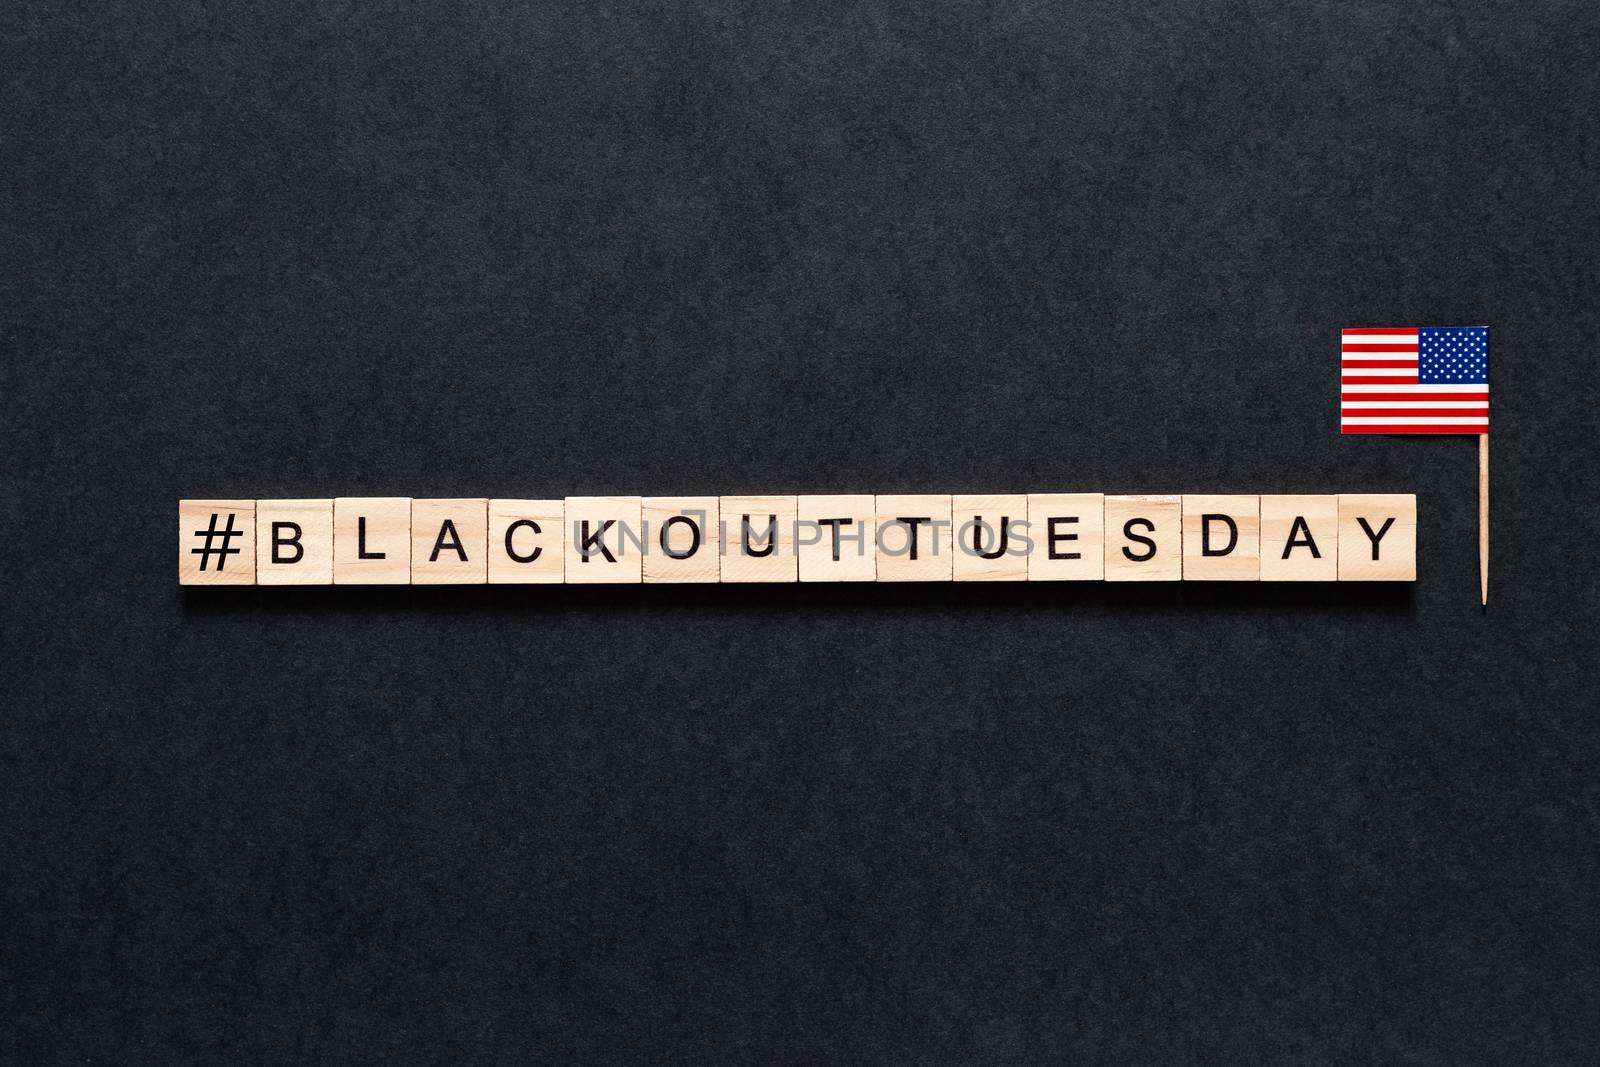 Blackout tuesday inscription on a black background. Black lives matter, blackout tuesday 2020 concept. unrest. rallies. brigandage. marauders. looting. American flag. USA by Pirlik